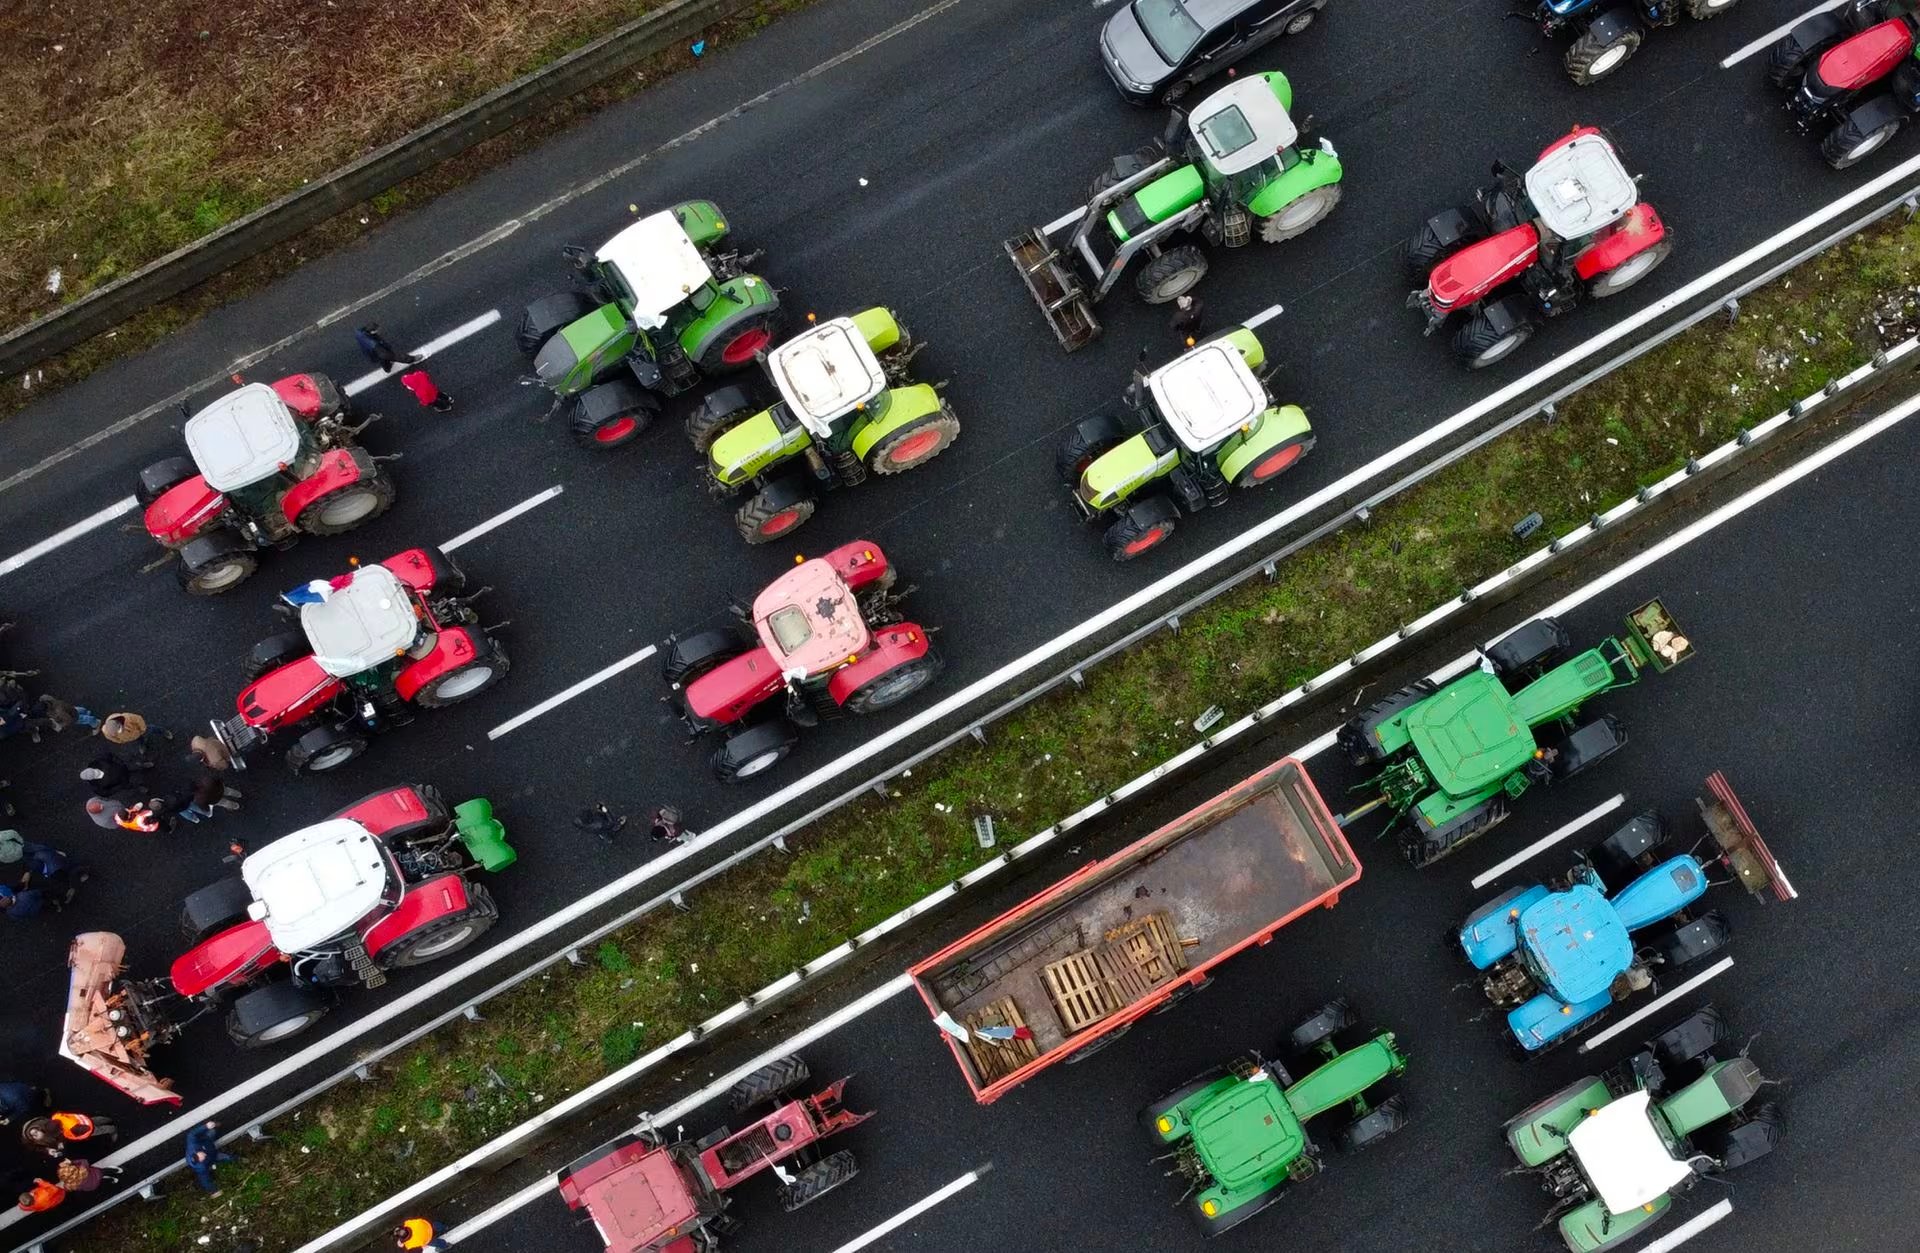 French farmers use their tractors to block the A1 highway near a highway toll station as they protest over price pressures, taxes and green regulation, grievances shared by farmers across Europe, in Chamant, near Paris, France, January 26. Photo: Reuters